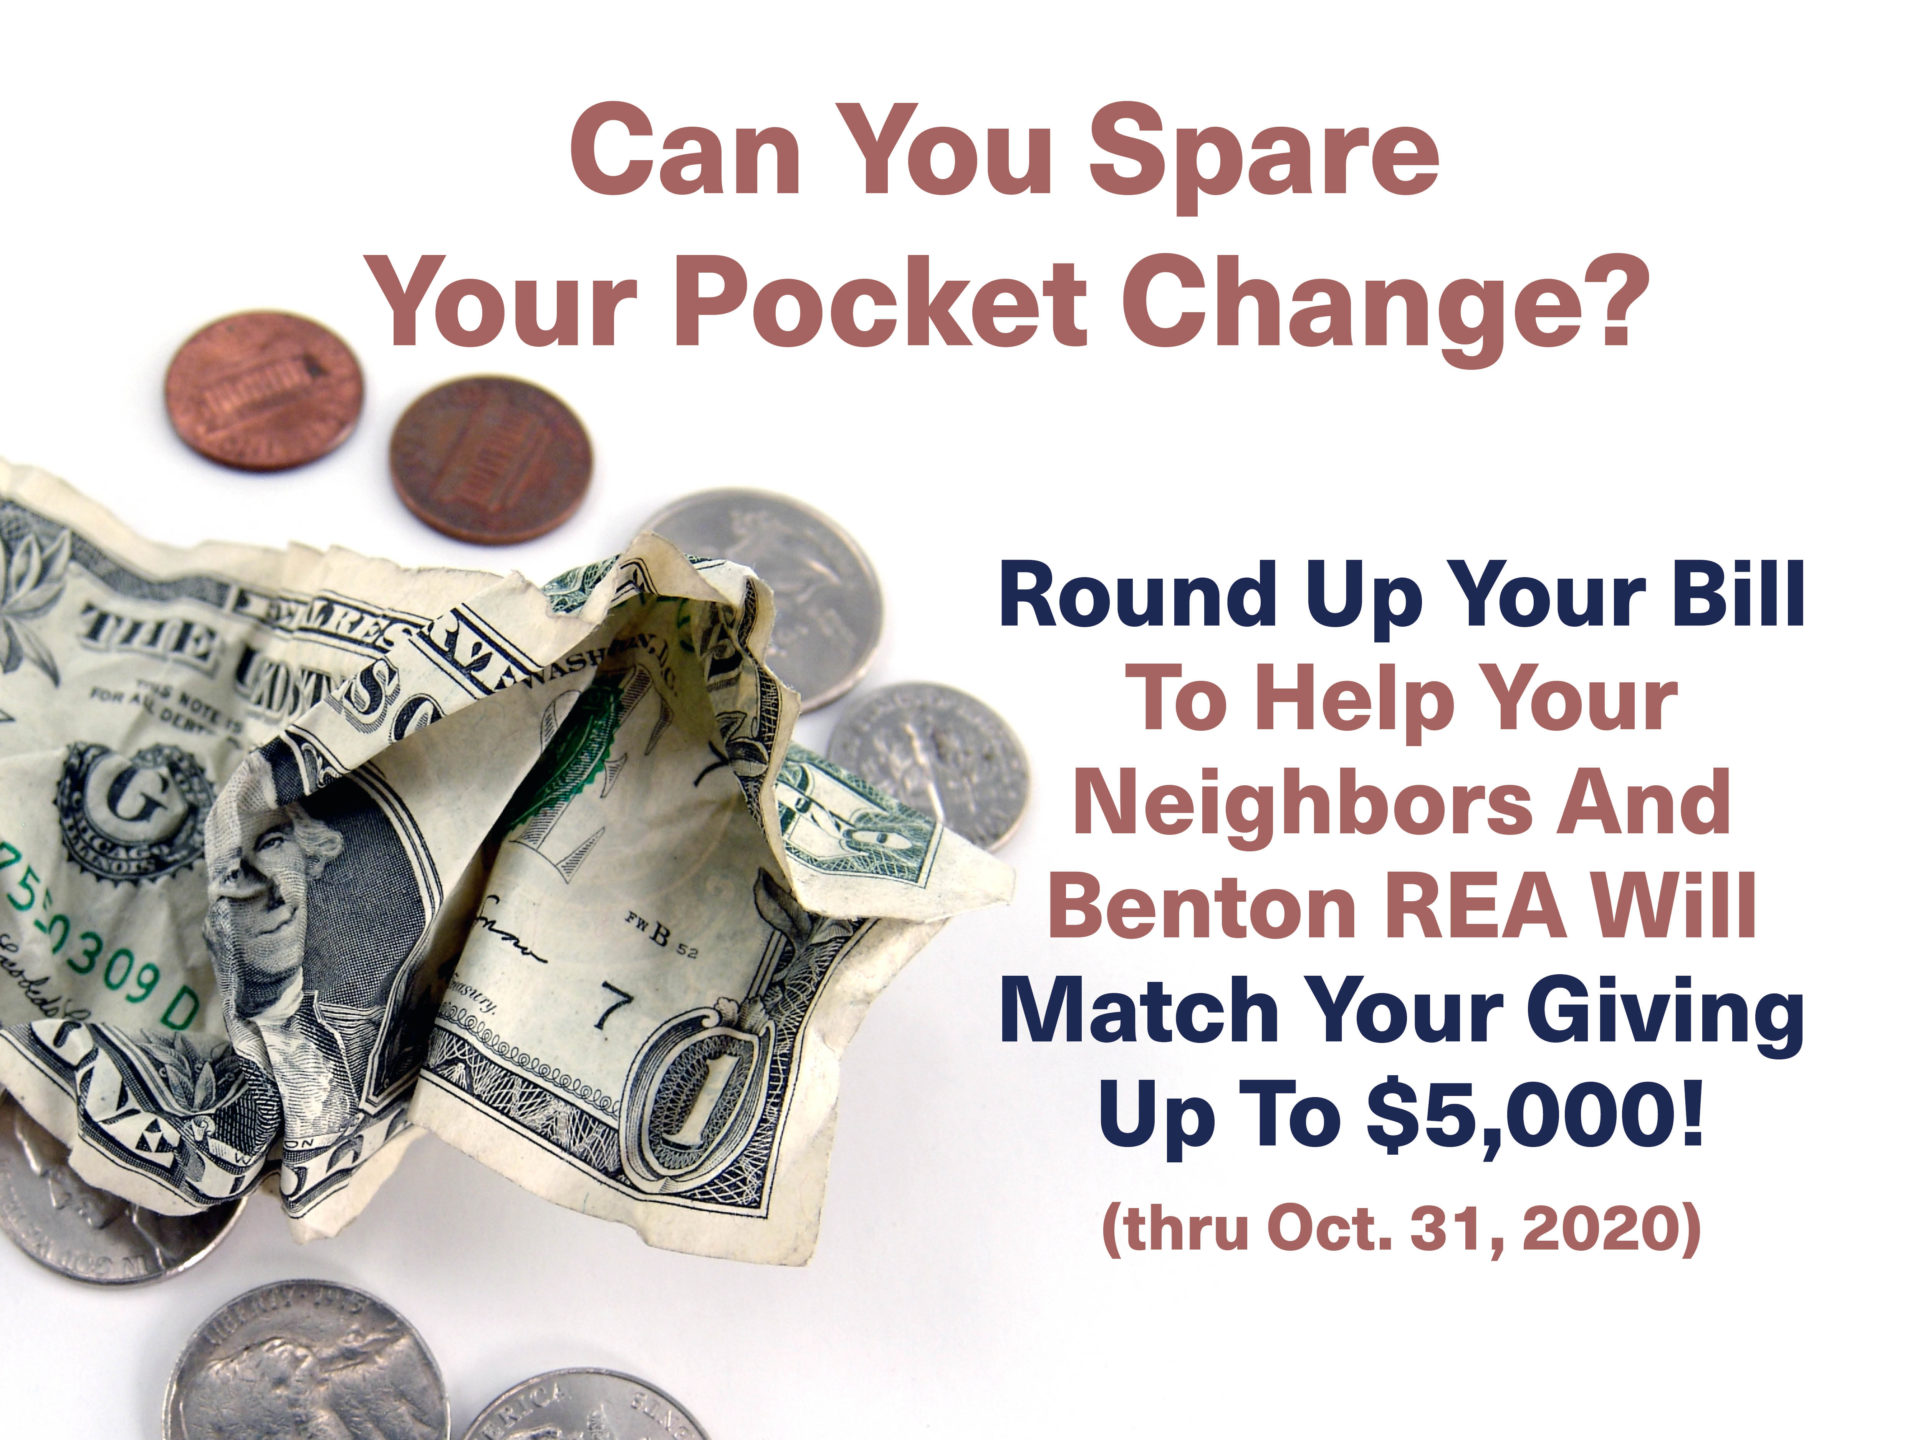 Can you spare your pocket change? Round up your bill to help your neighbors and Benton REA will match our giving up to %5,000 (thru Oct. 31 2020)